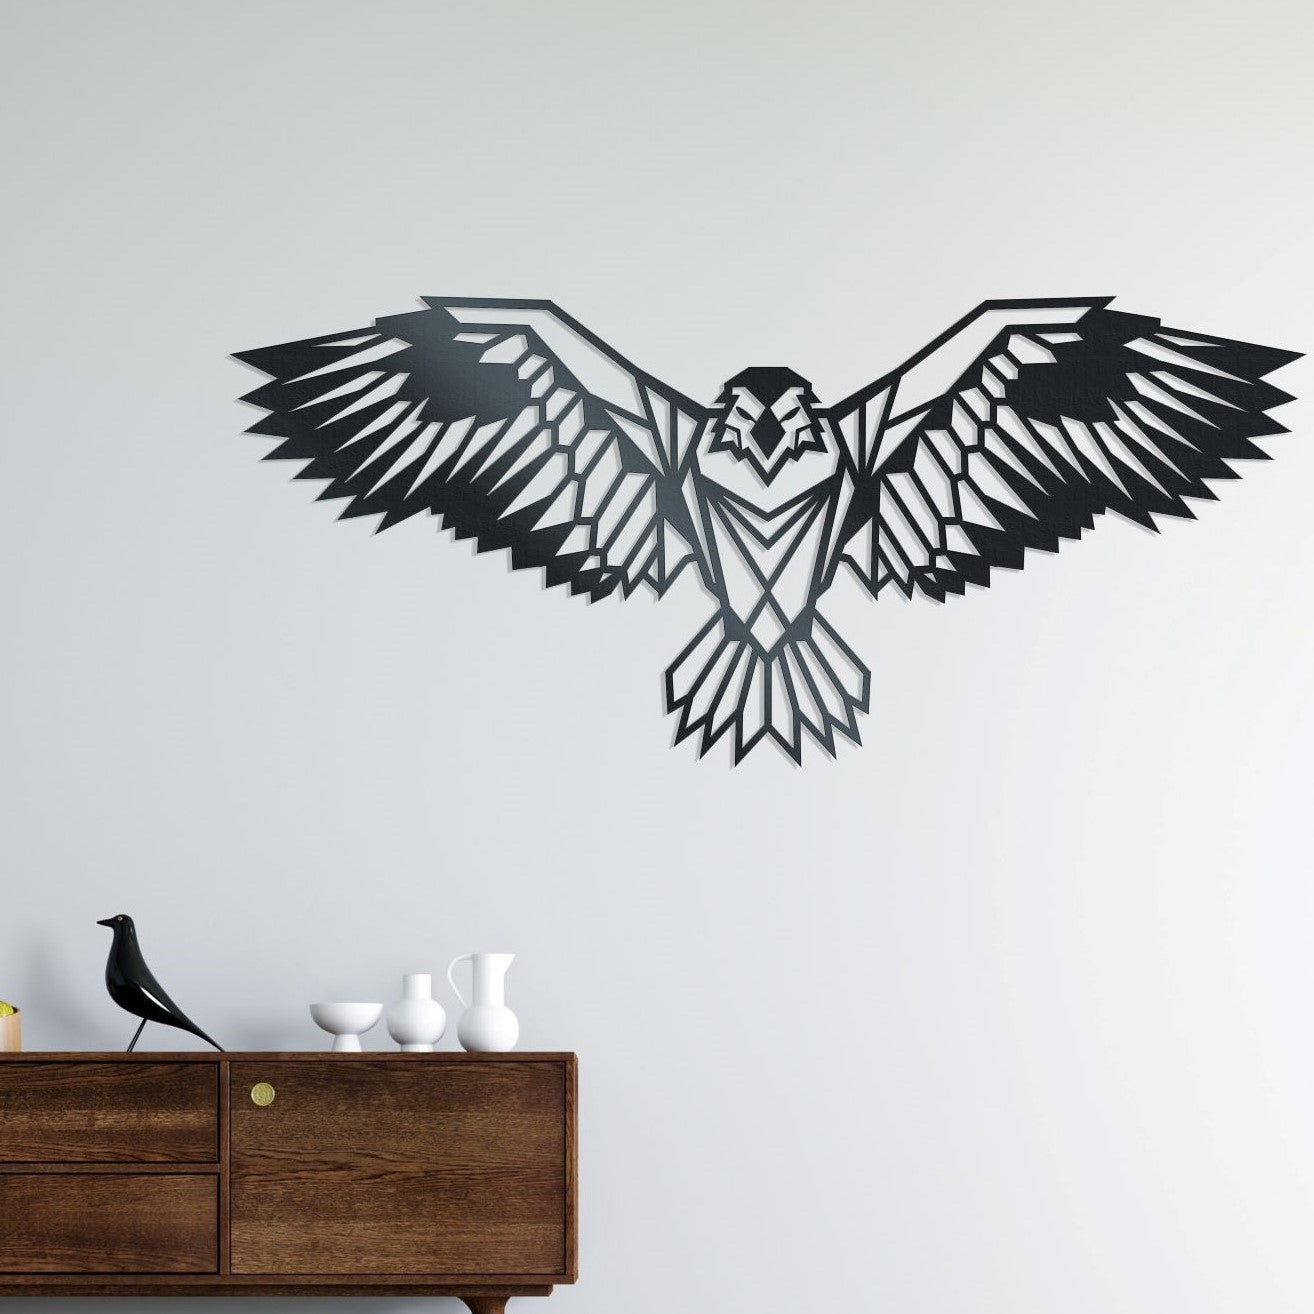 A Geometric moden and stylish metal decor of an eagle with their wings spread